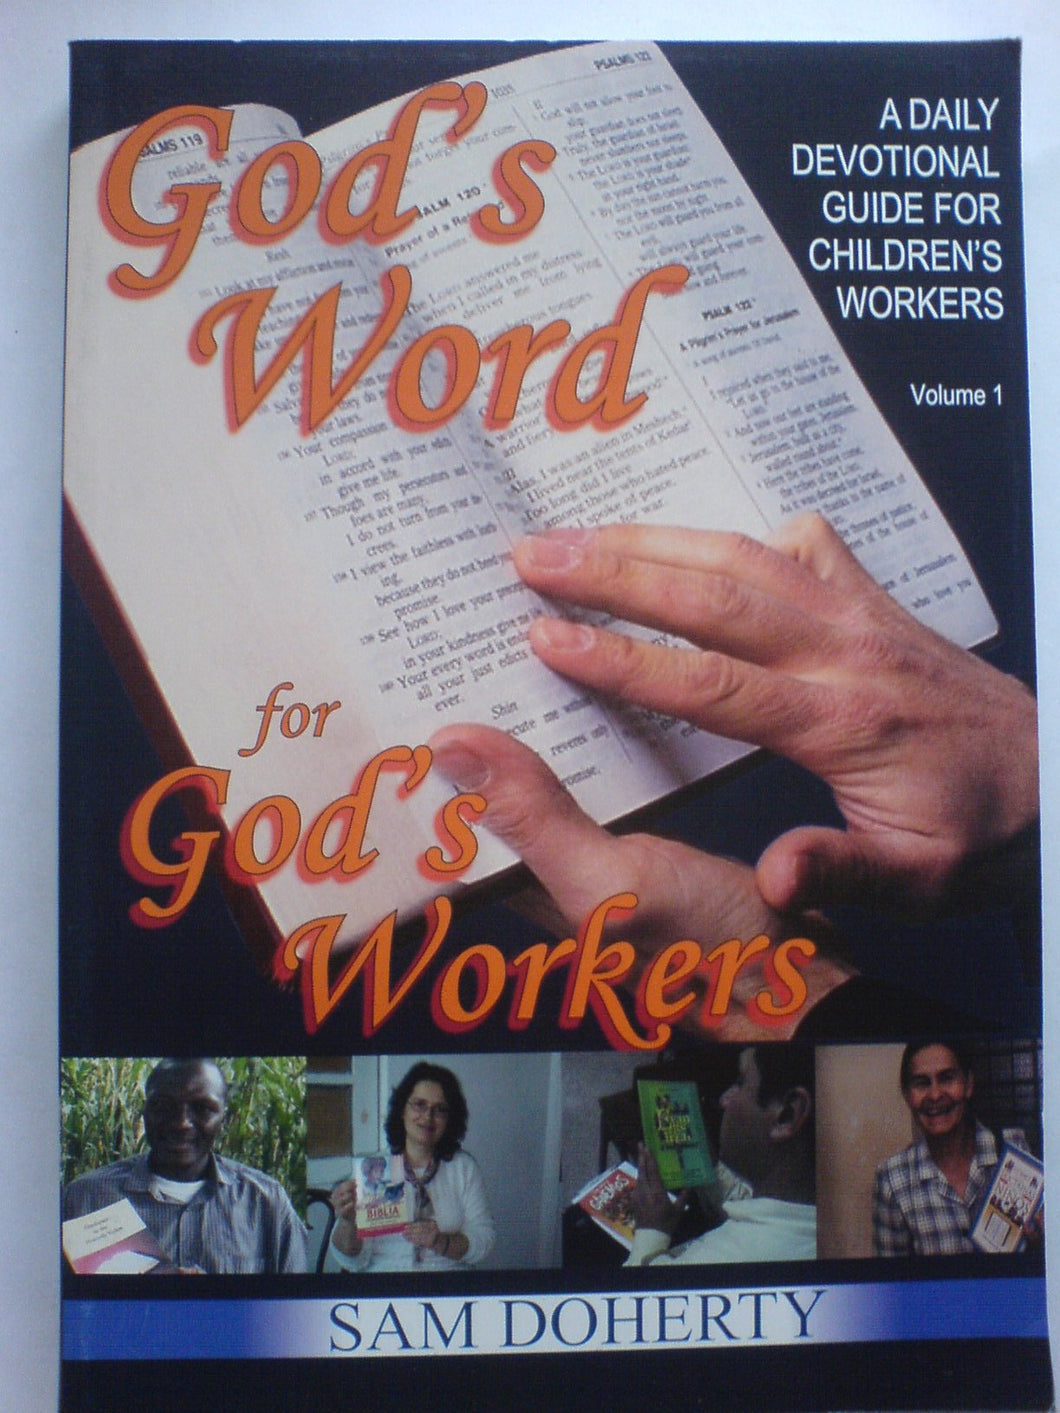 God's Word for God's Workers Volume 1 - A Daily Devotional Guide for Children's Workers